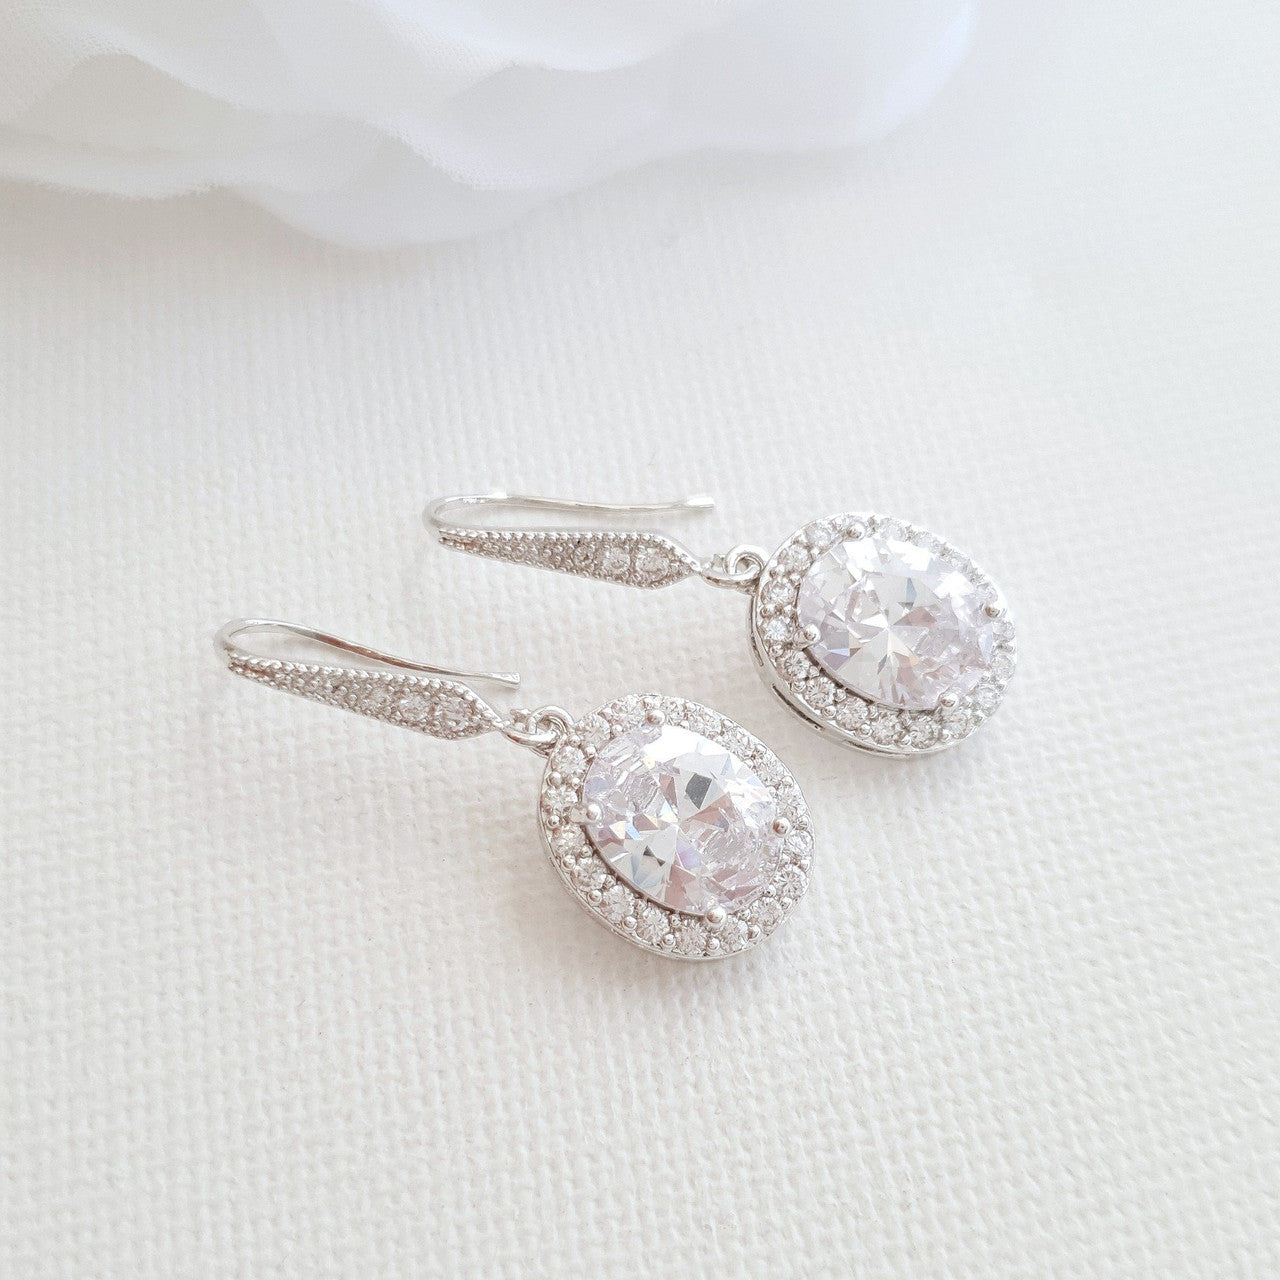 Small dangly bridal Earrings with Decorative ear hooks- Poetry Designs